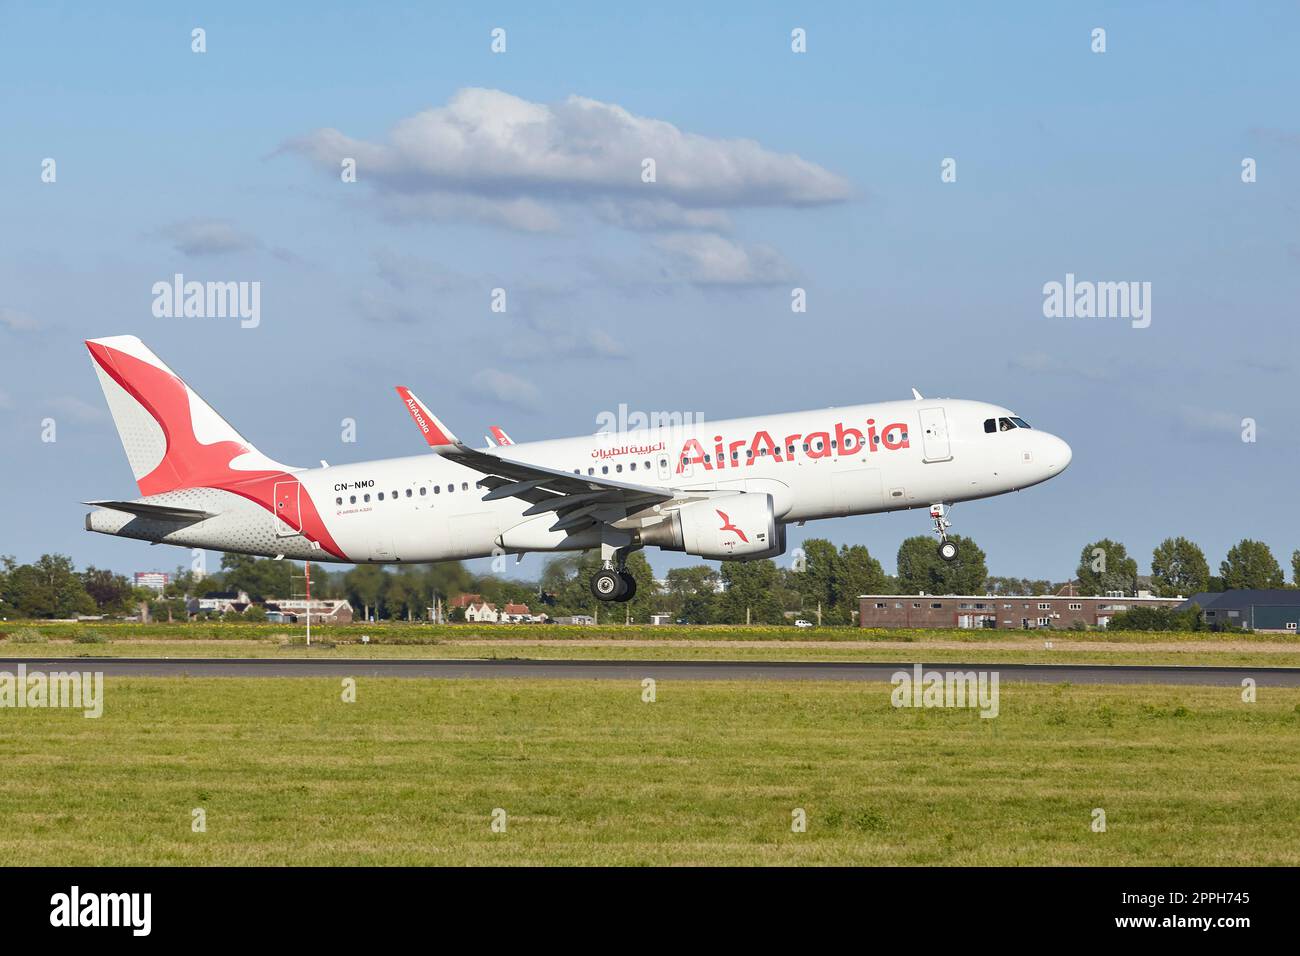 Amsterdam Airport Schiphol - Airbus A320-214 of Air Arabia Maroc lands Stock Photo